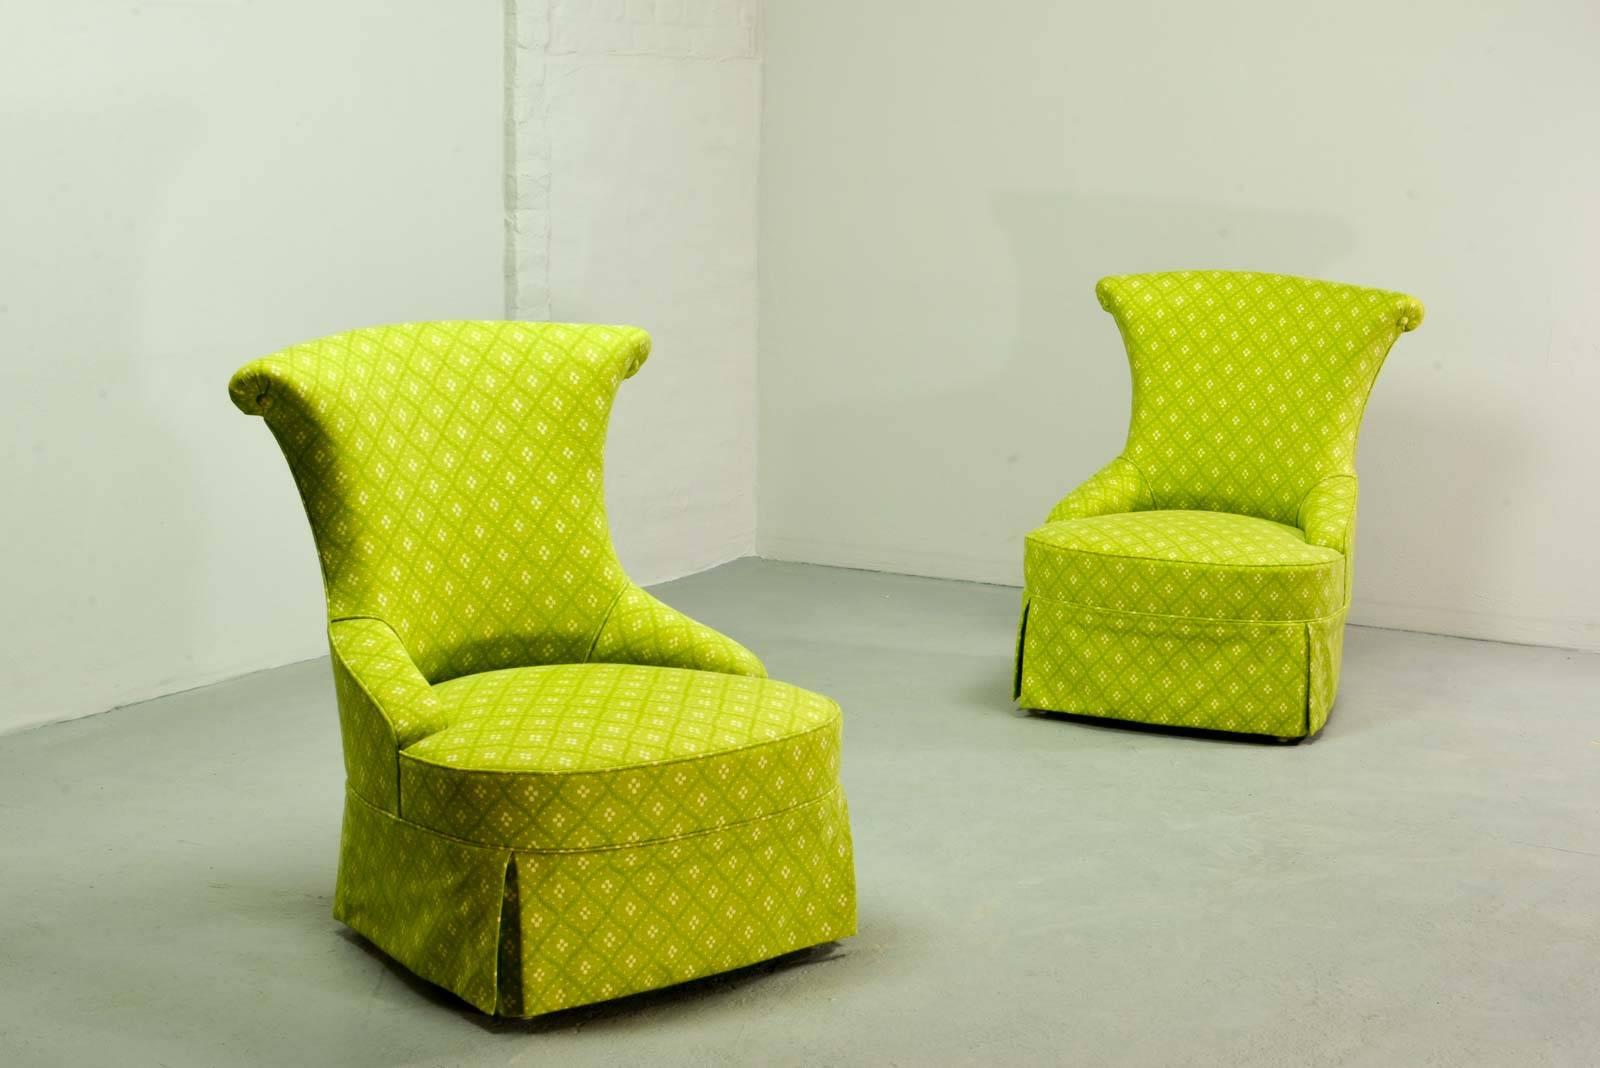 An exclusive pair of boudoir chairs in a bright lime colored high quality fabric. The refurbishment of the chairs is done with great craftsmanship and eye for detail. This stunning pair is in absolute excellent condition!